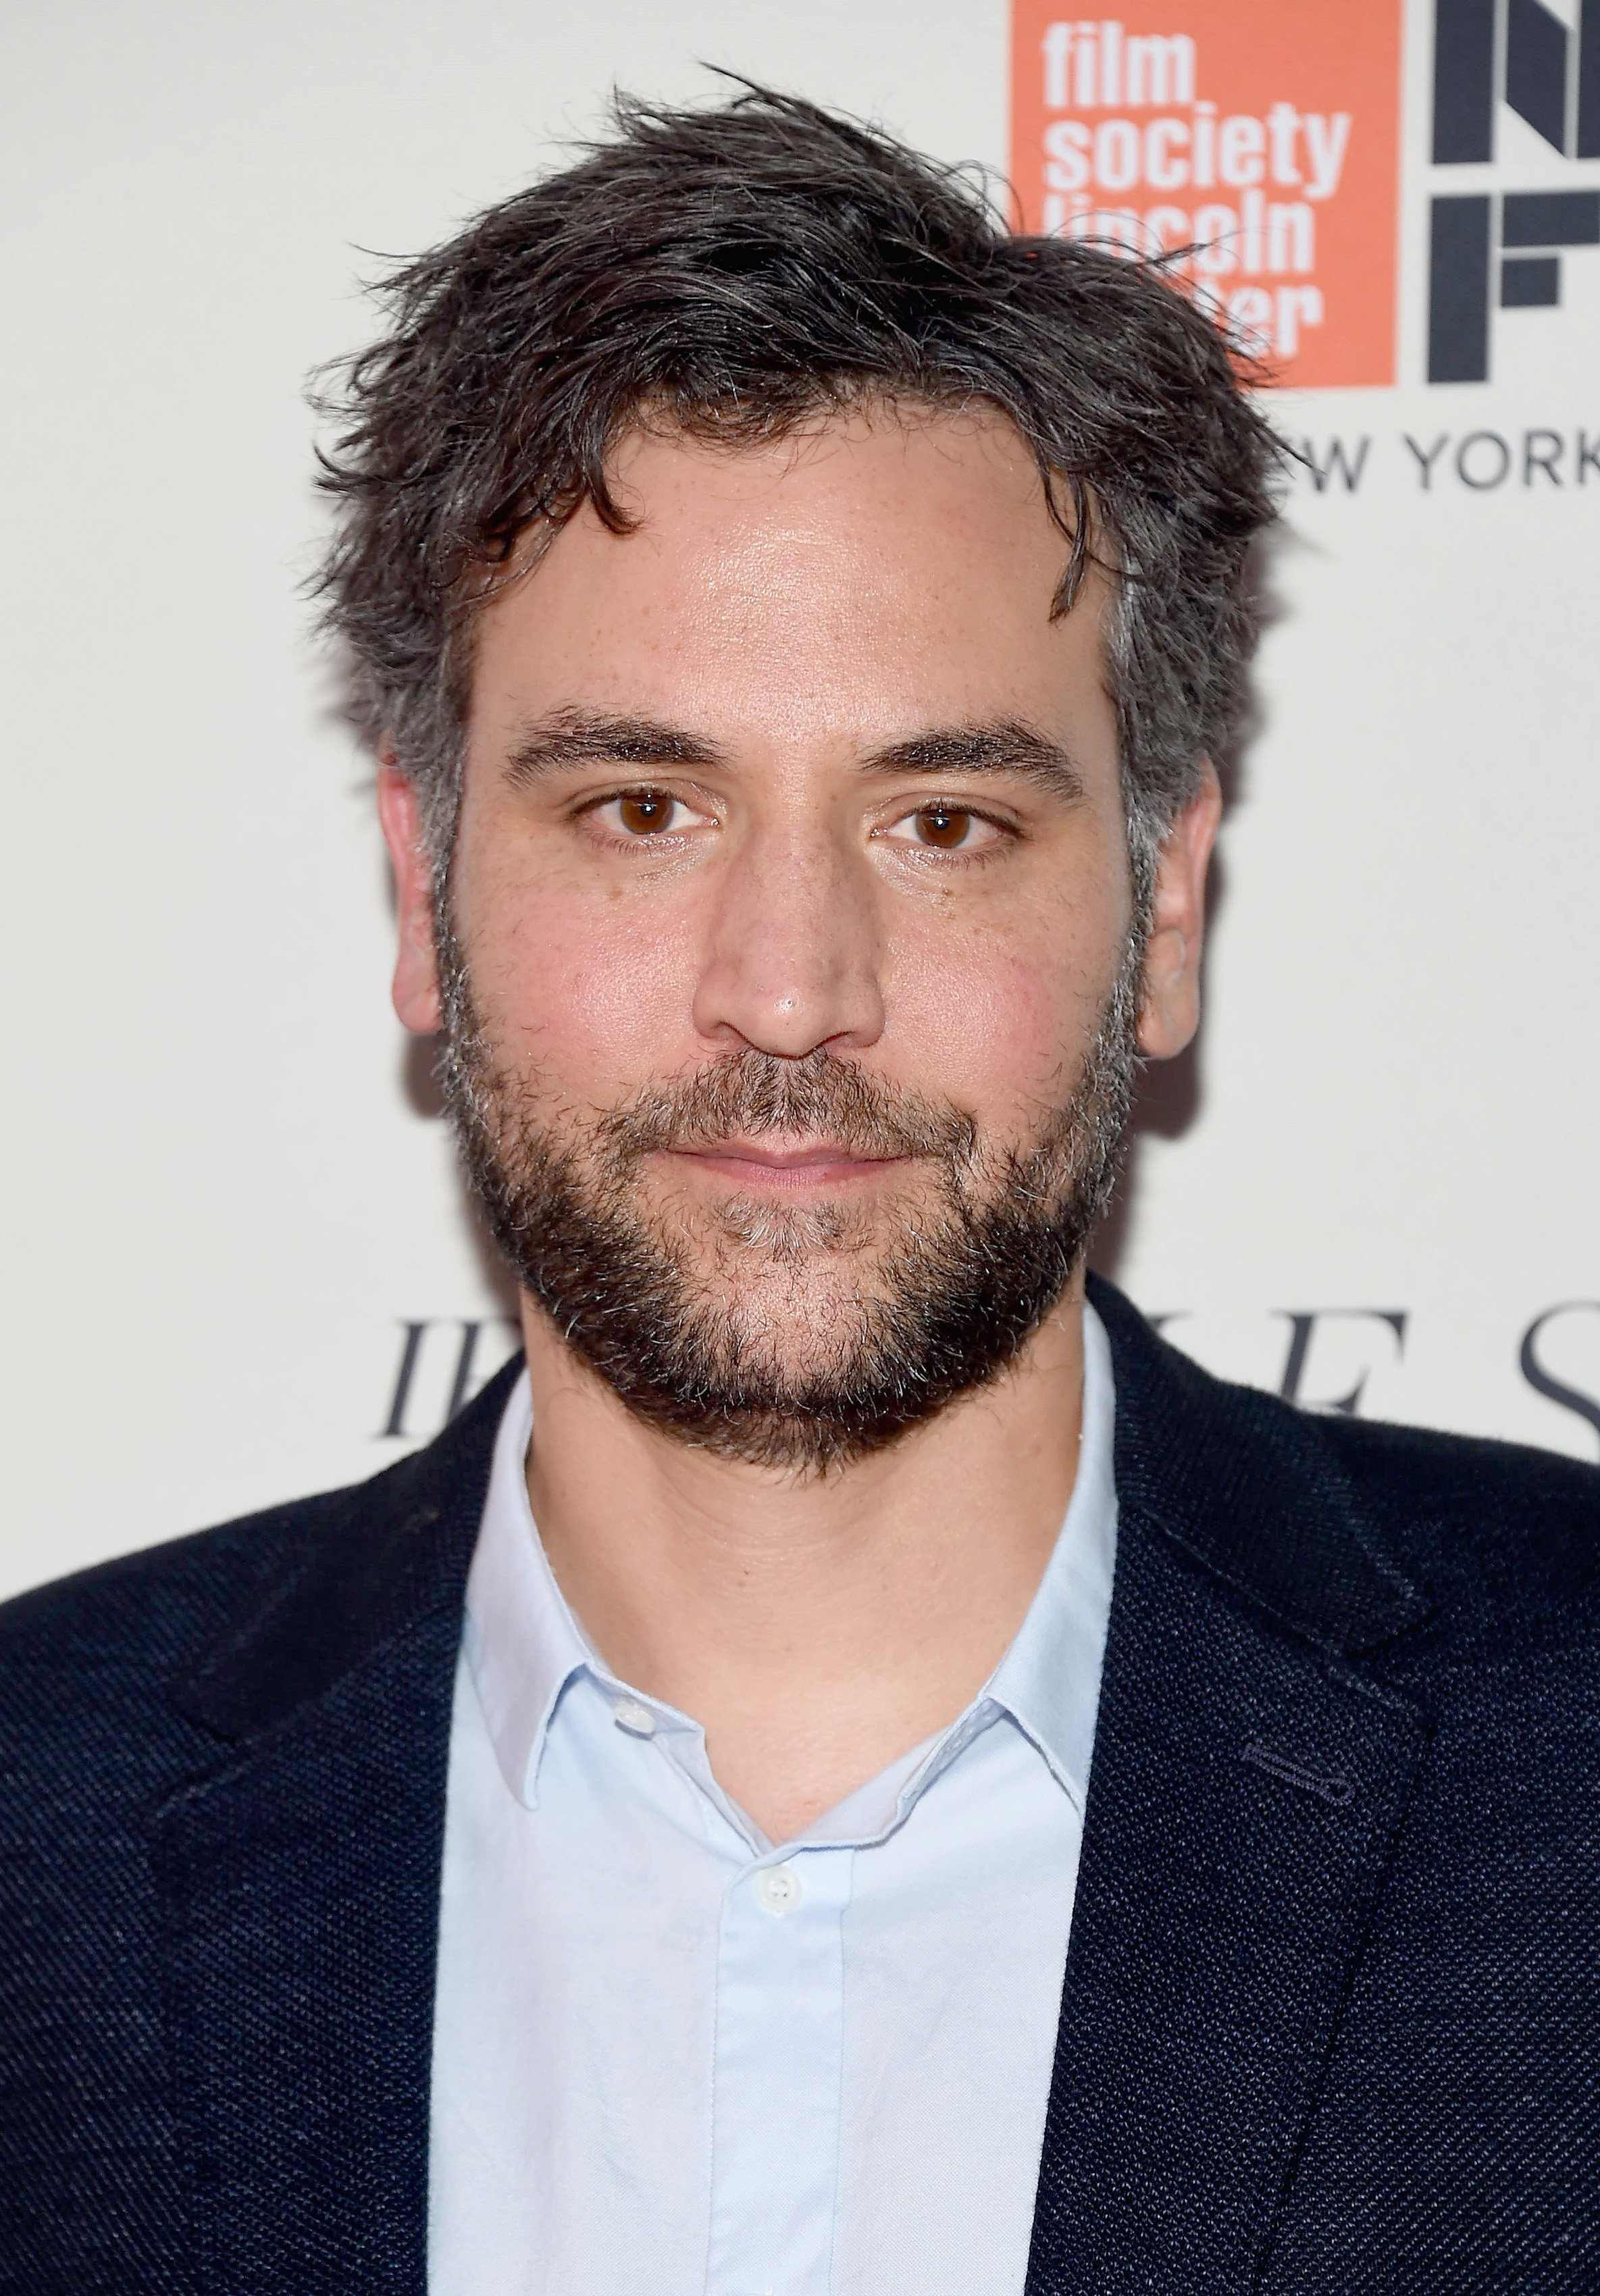 Actor Josh Radnor at the premiere of " If Beale Street Could Talk" during the 56th New York Film Festival on October 9, 2018, in New York City. | Source: Getty Images